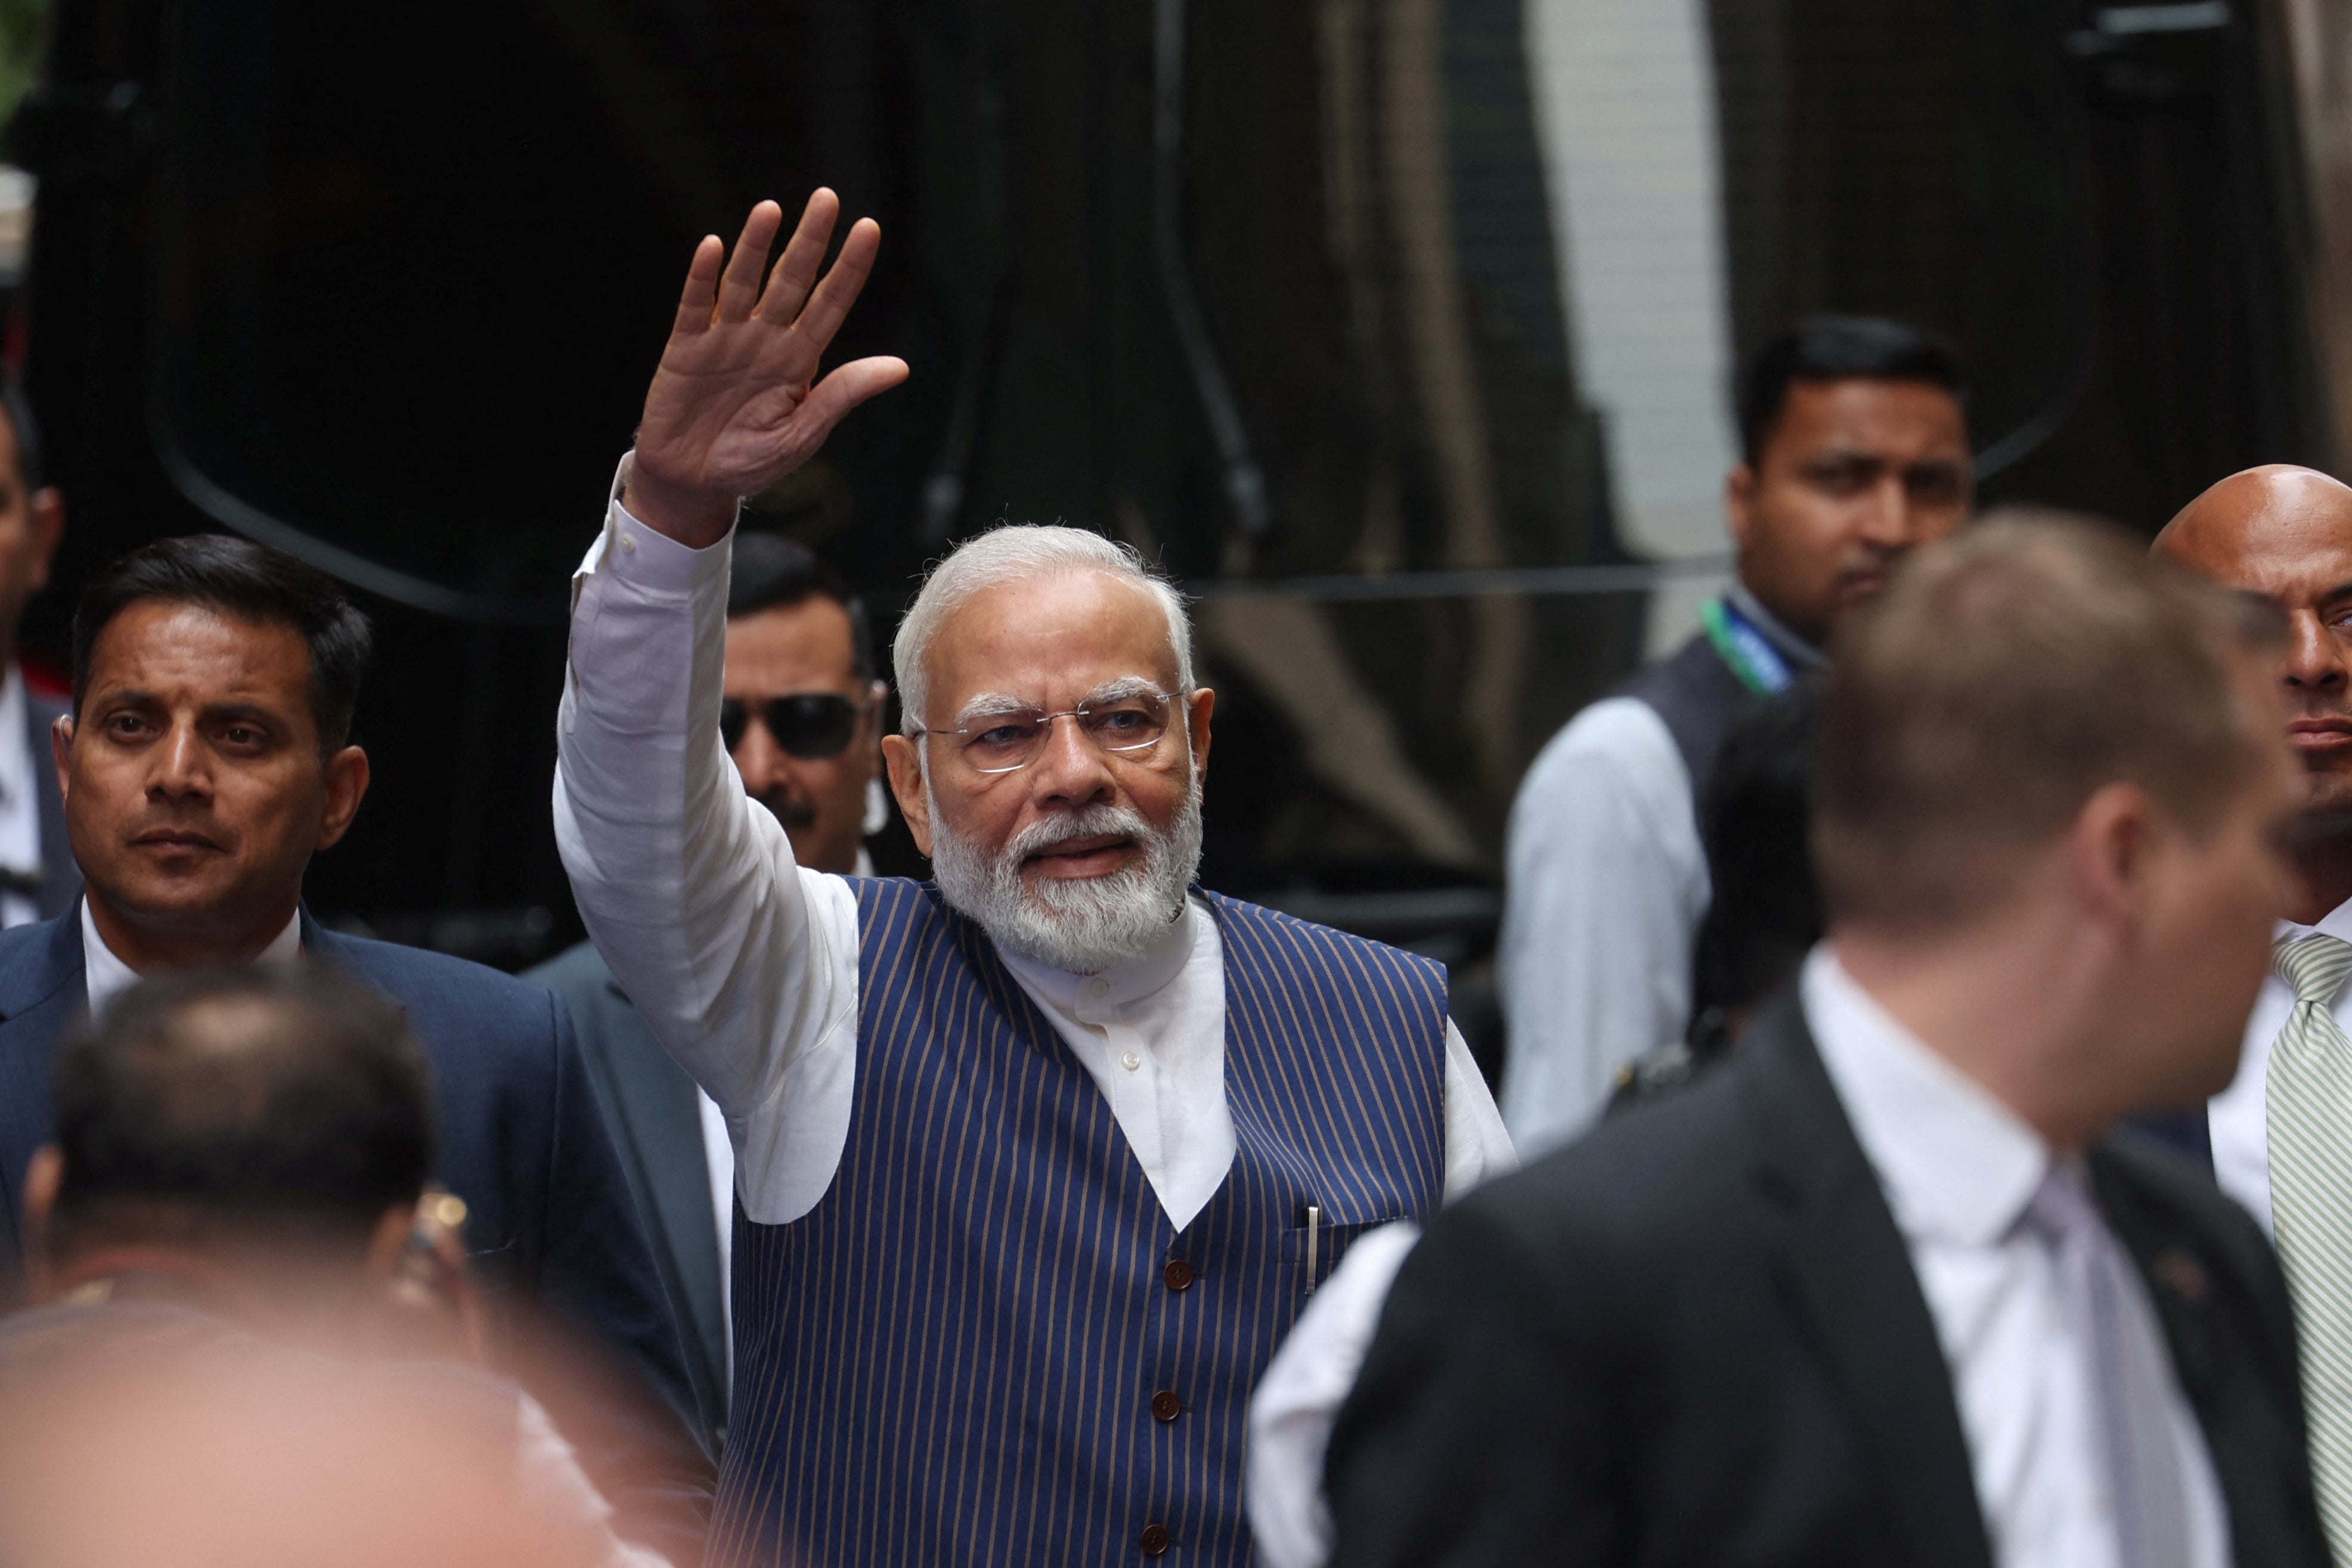 Narendra Modi waves to supporters as he arrives at the Lotte hotel in New York City on 20 June